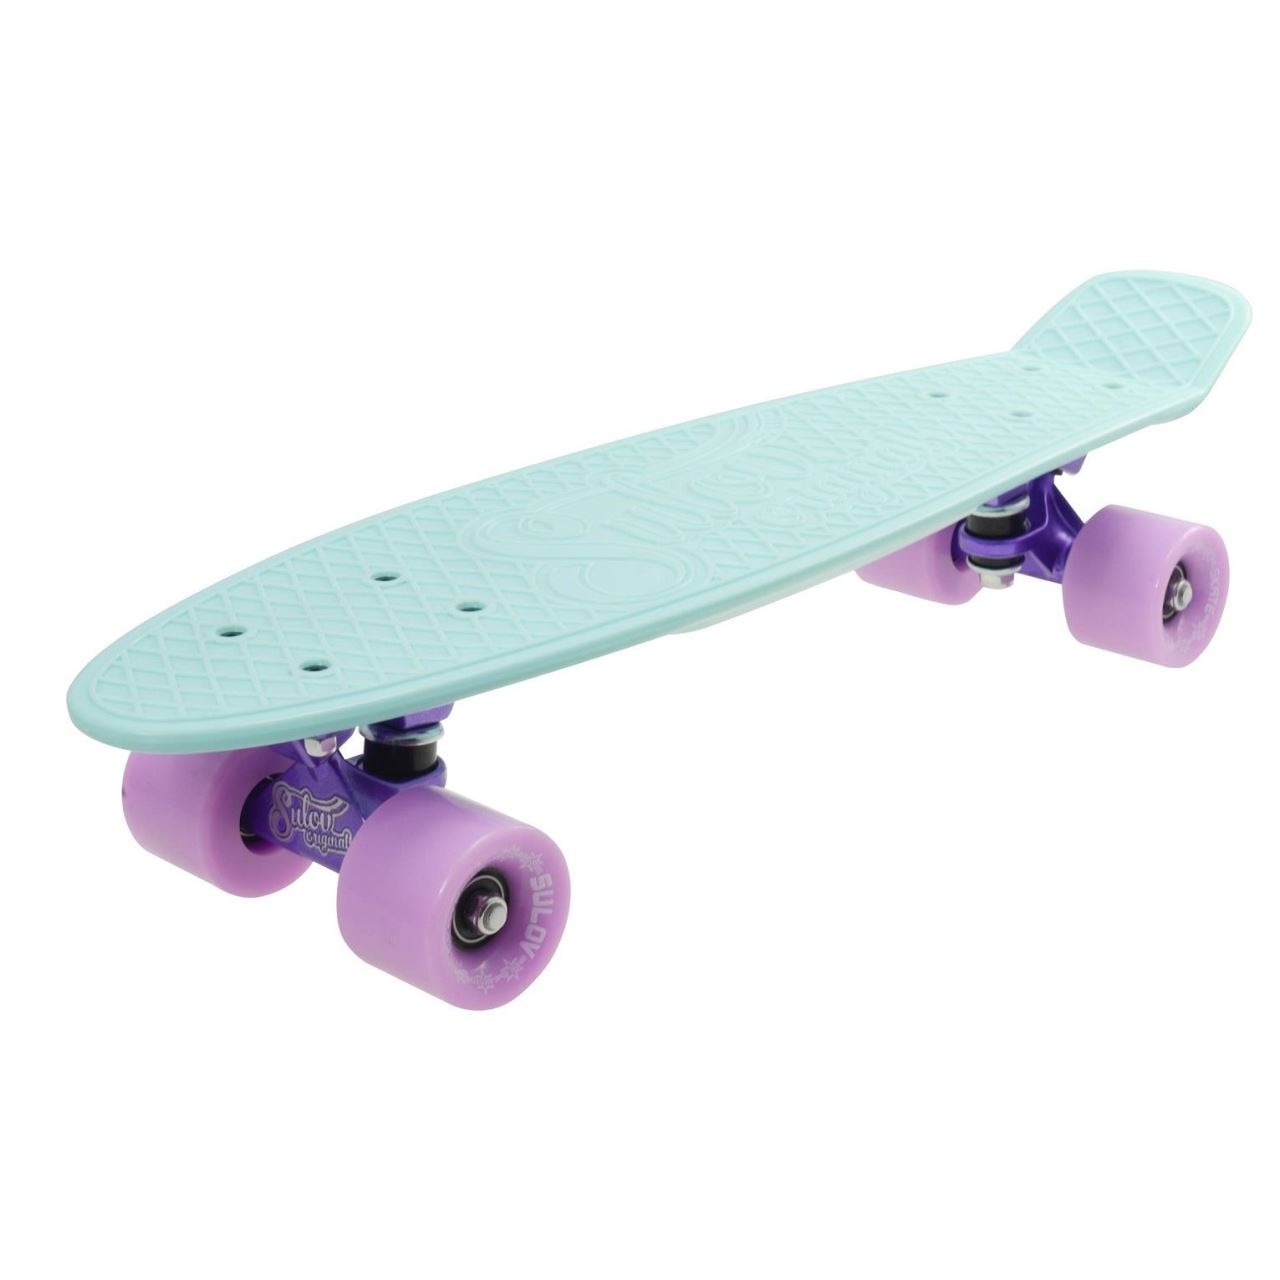 Bruise Competitive promotion Penny board 22" Pastel, albastru deschis - eMAG.ro